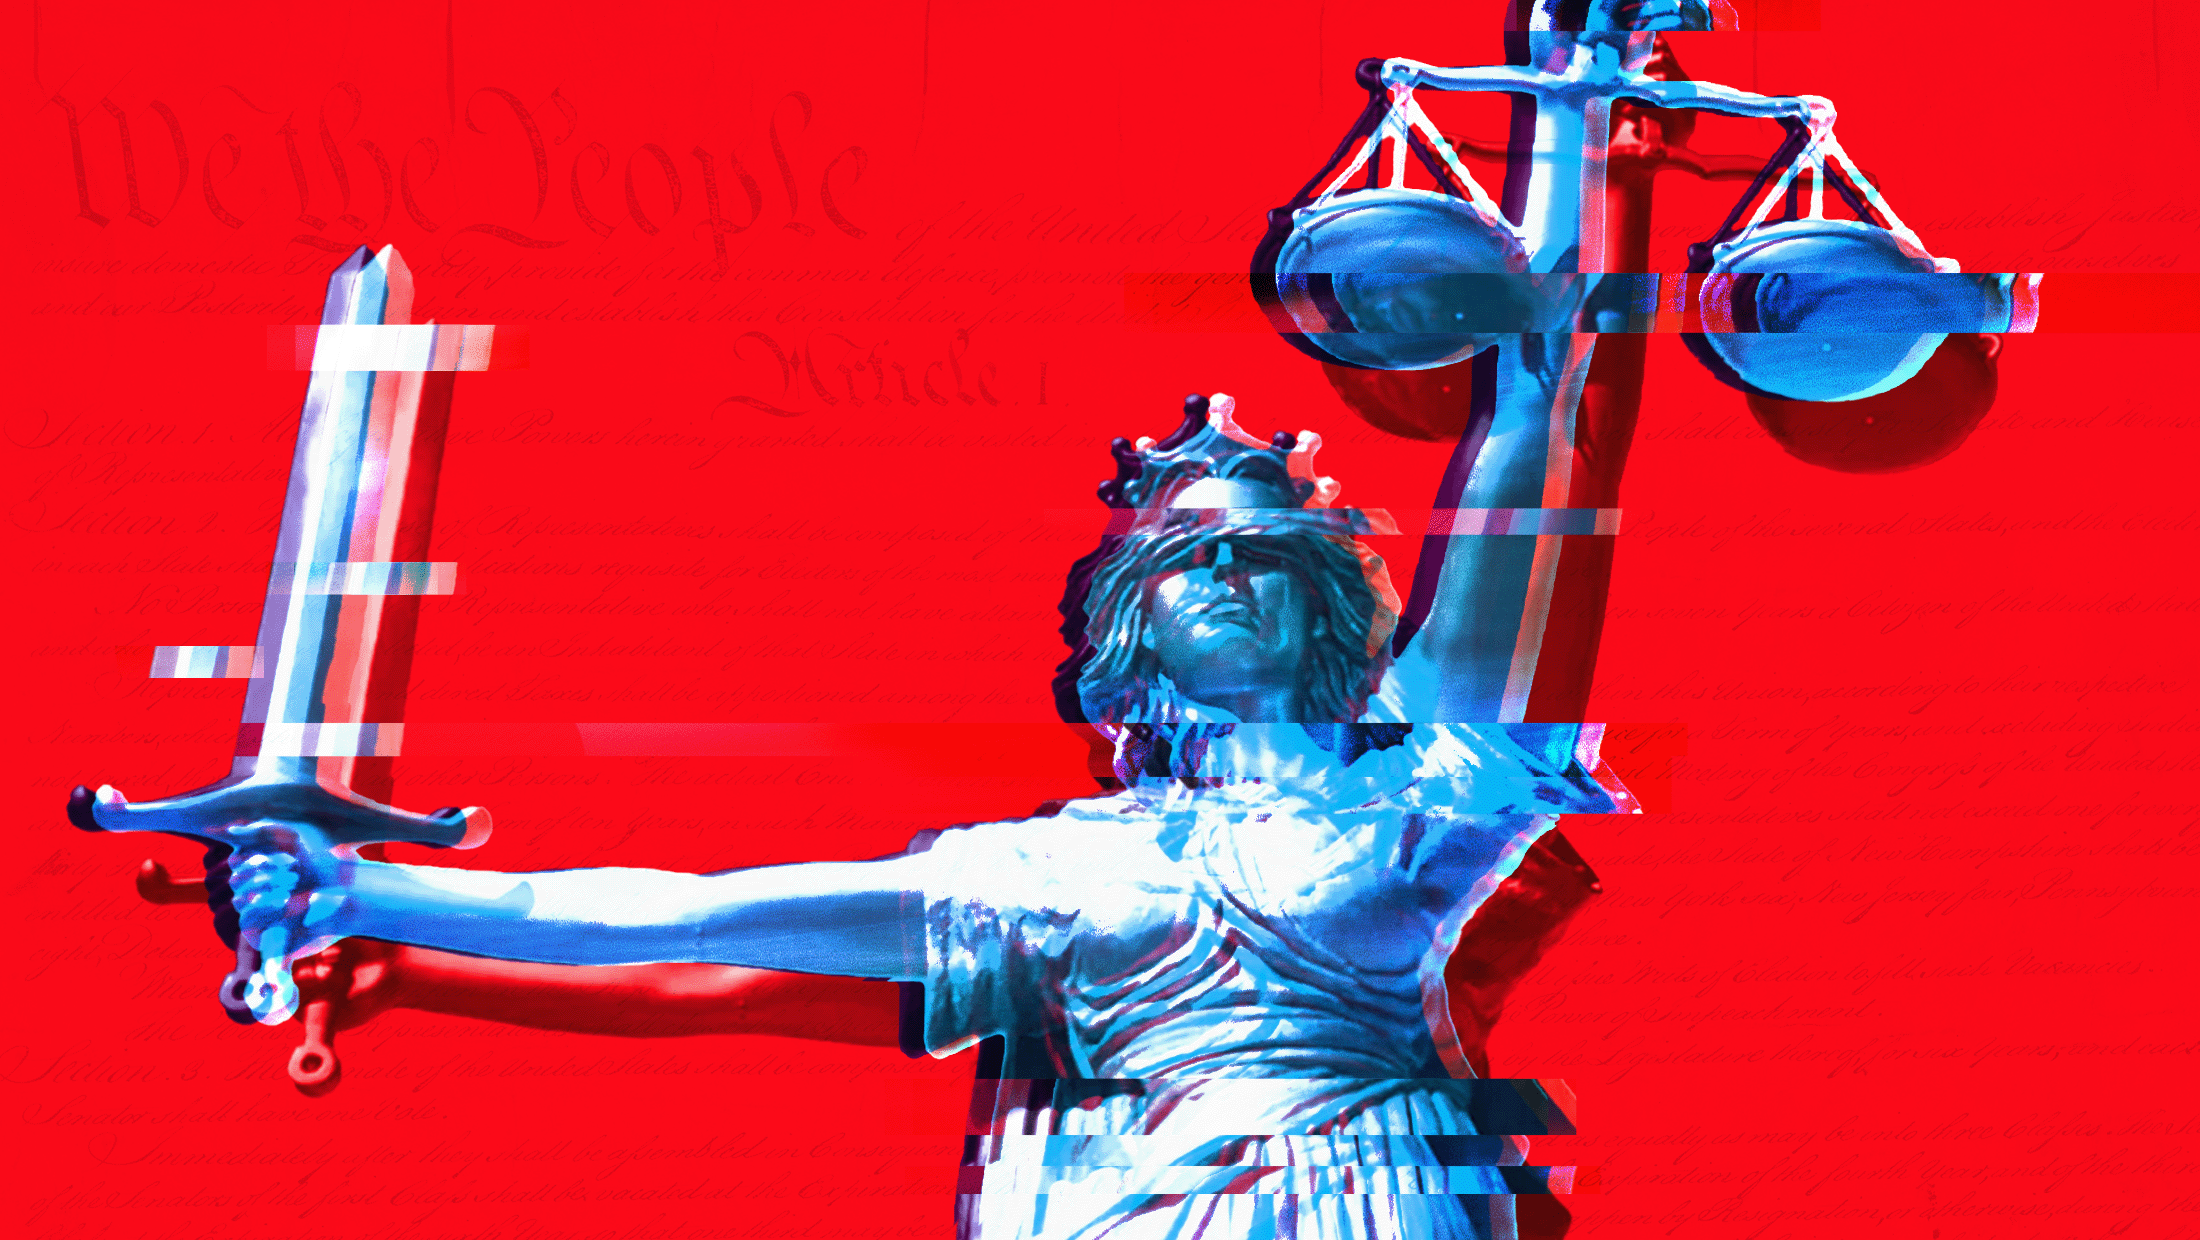 Red background with the U.S. Constitution faded into the background and lady liberty holding up a scale in one hand and a sword in the other looking like she is glitching.